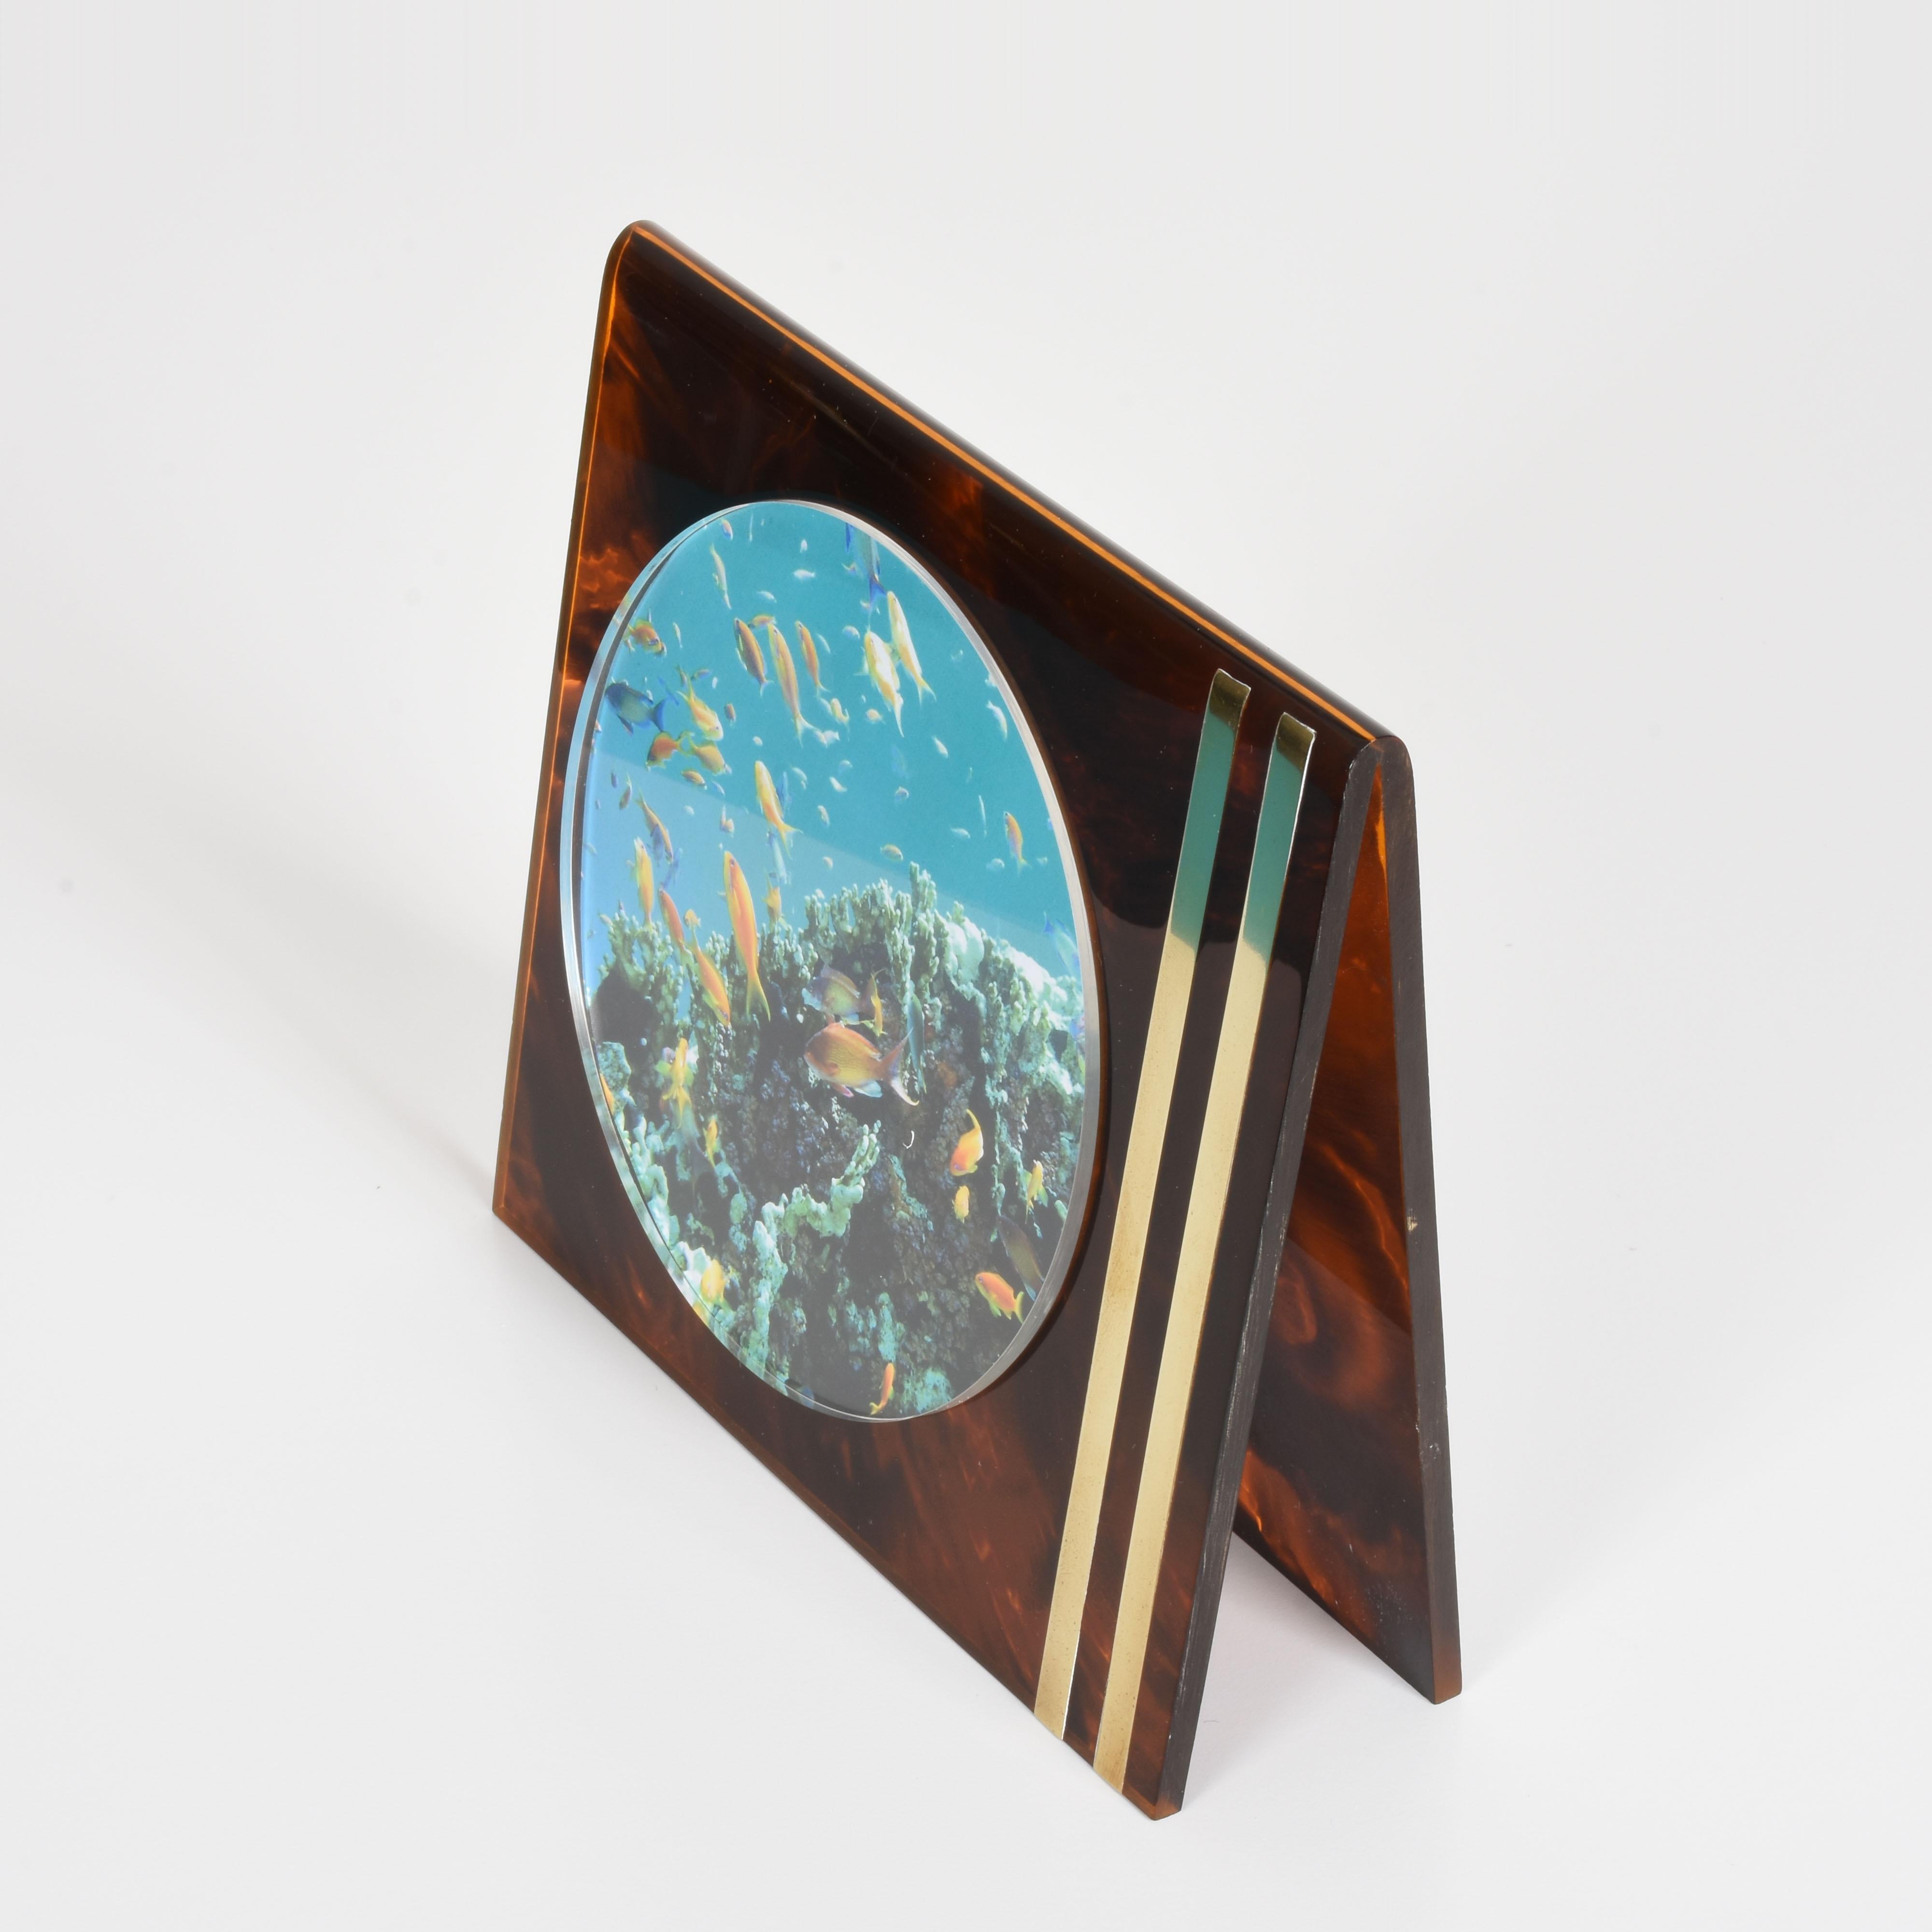 Attributable to Gabriella Crespi photo frame in Lucite tortoiseshell and brass, Italy, 1970s.